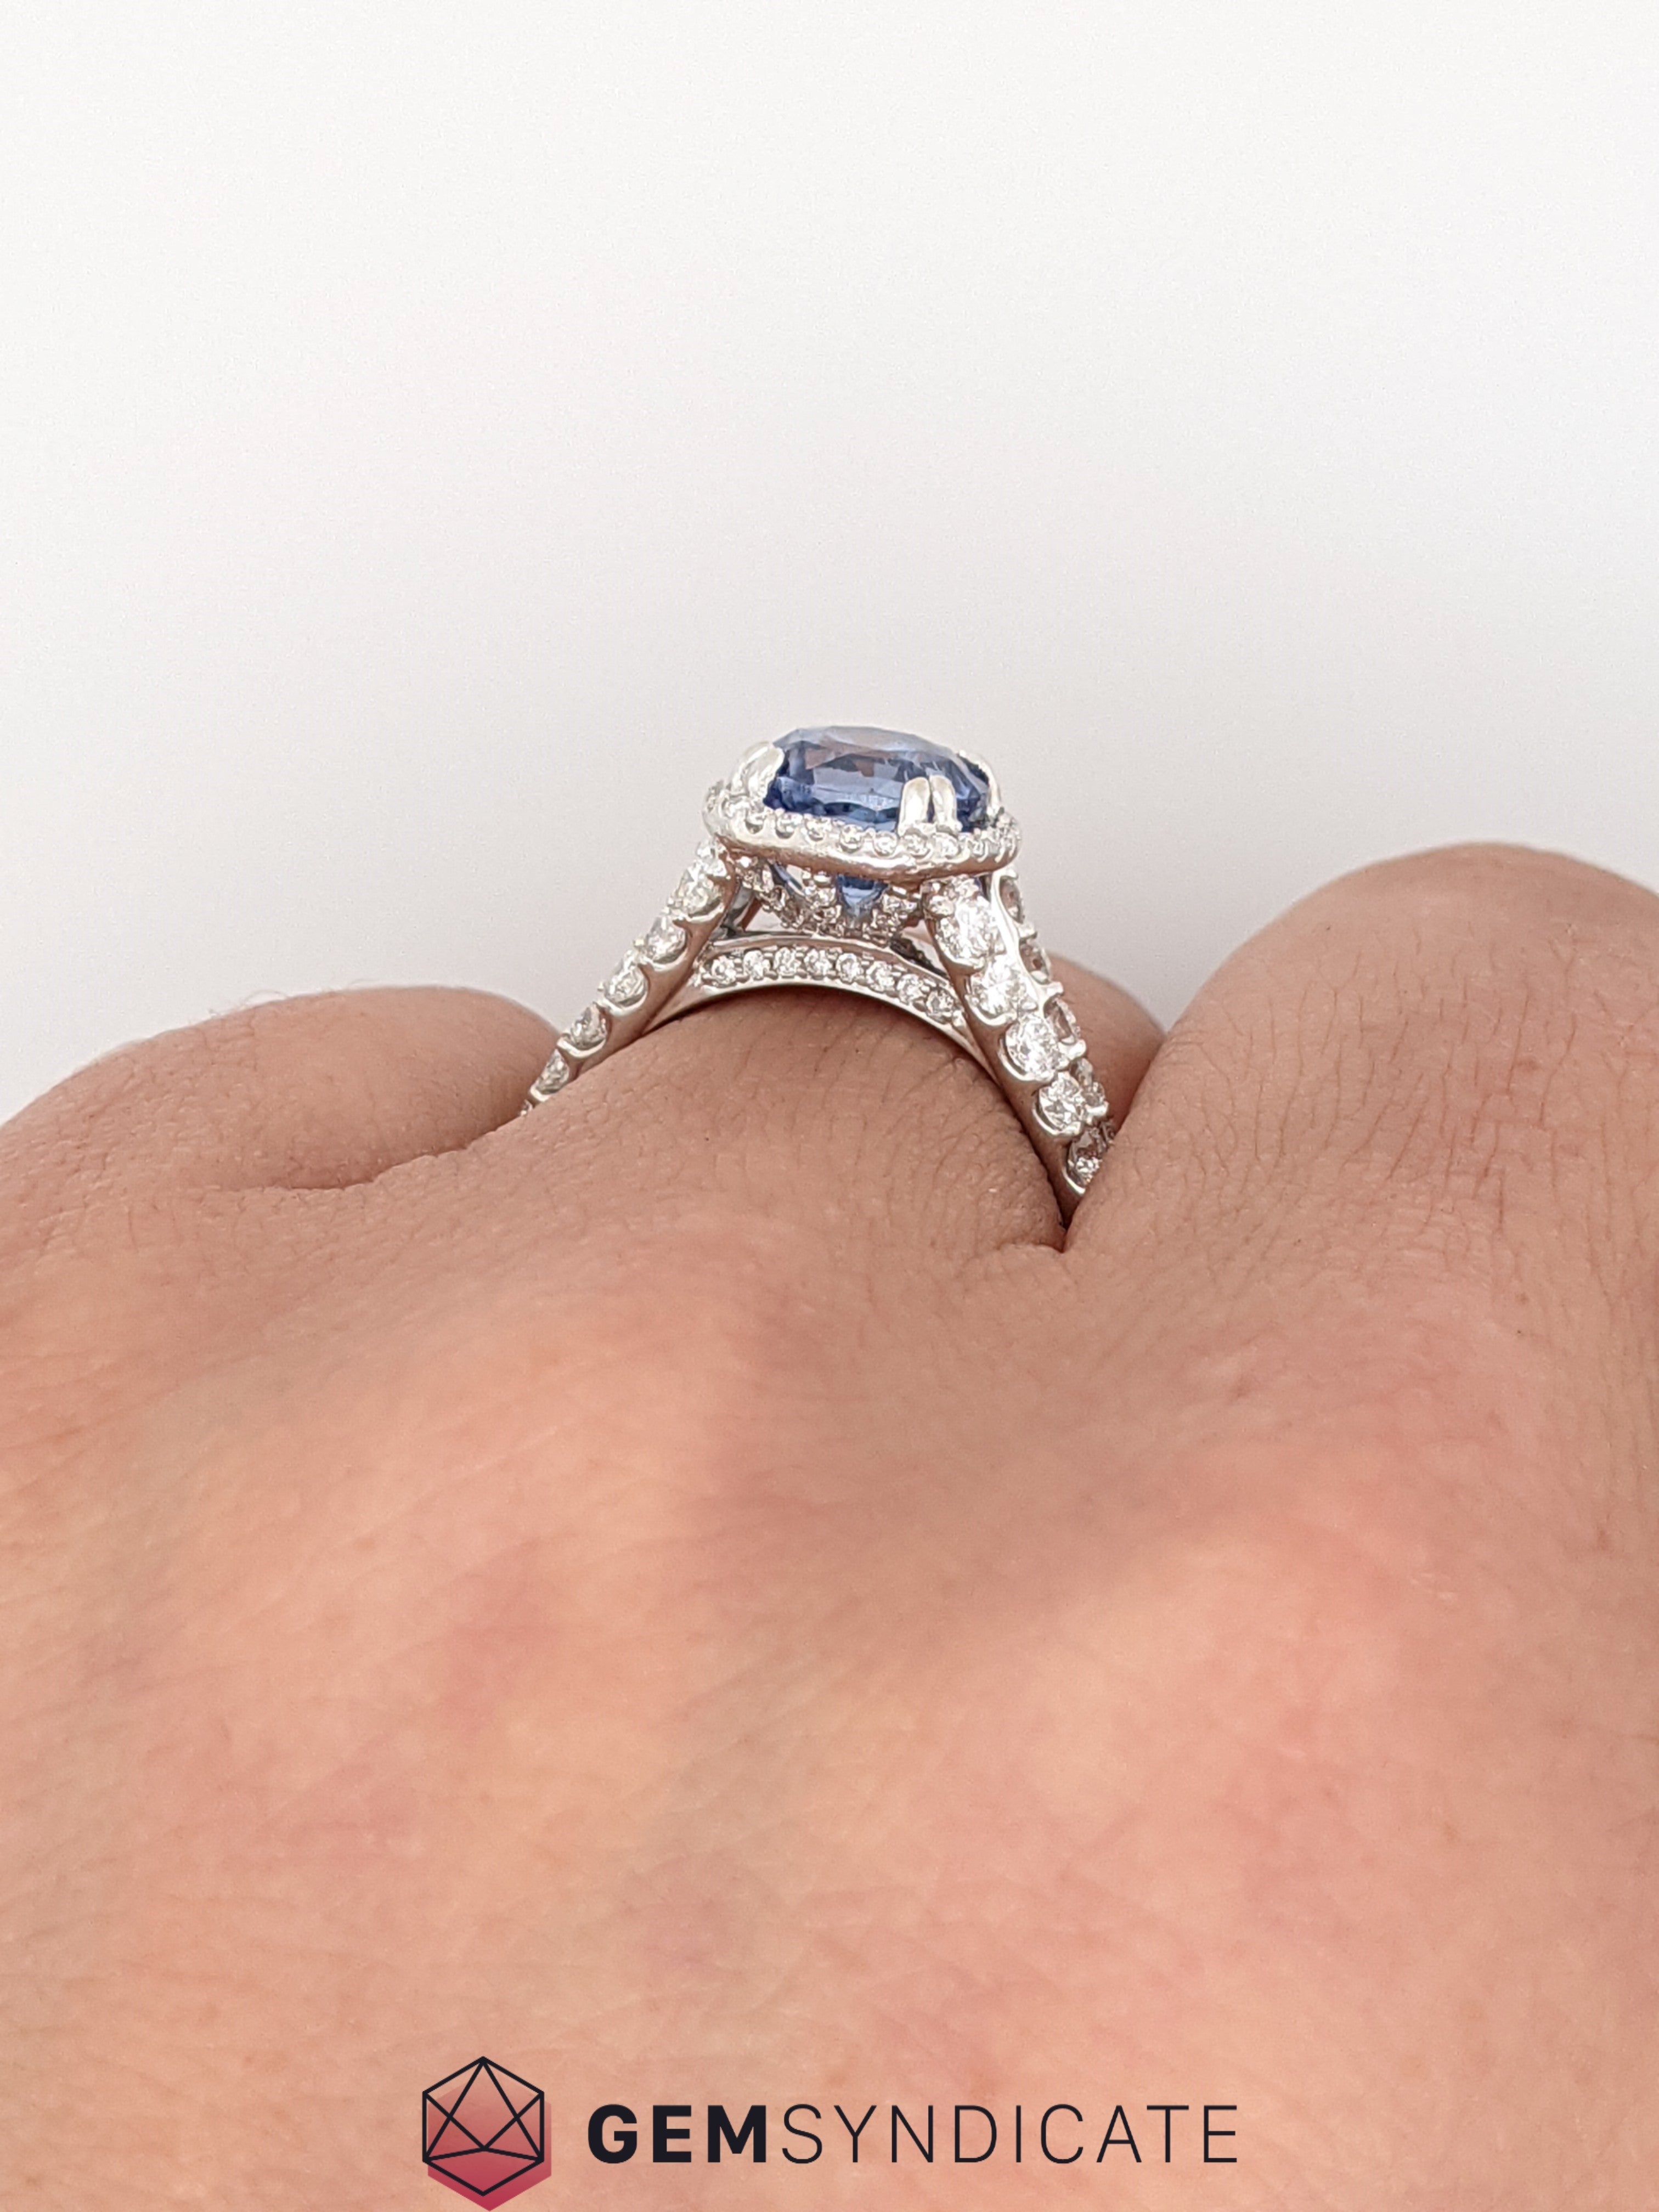 Show-Stopping Blue Sapphire Halo Ring in 14k White Gold